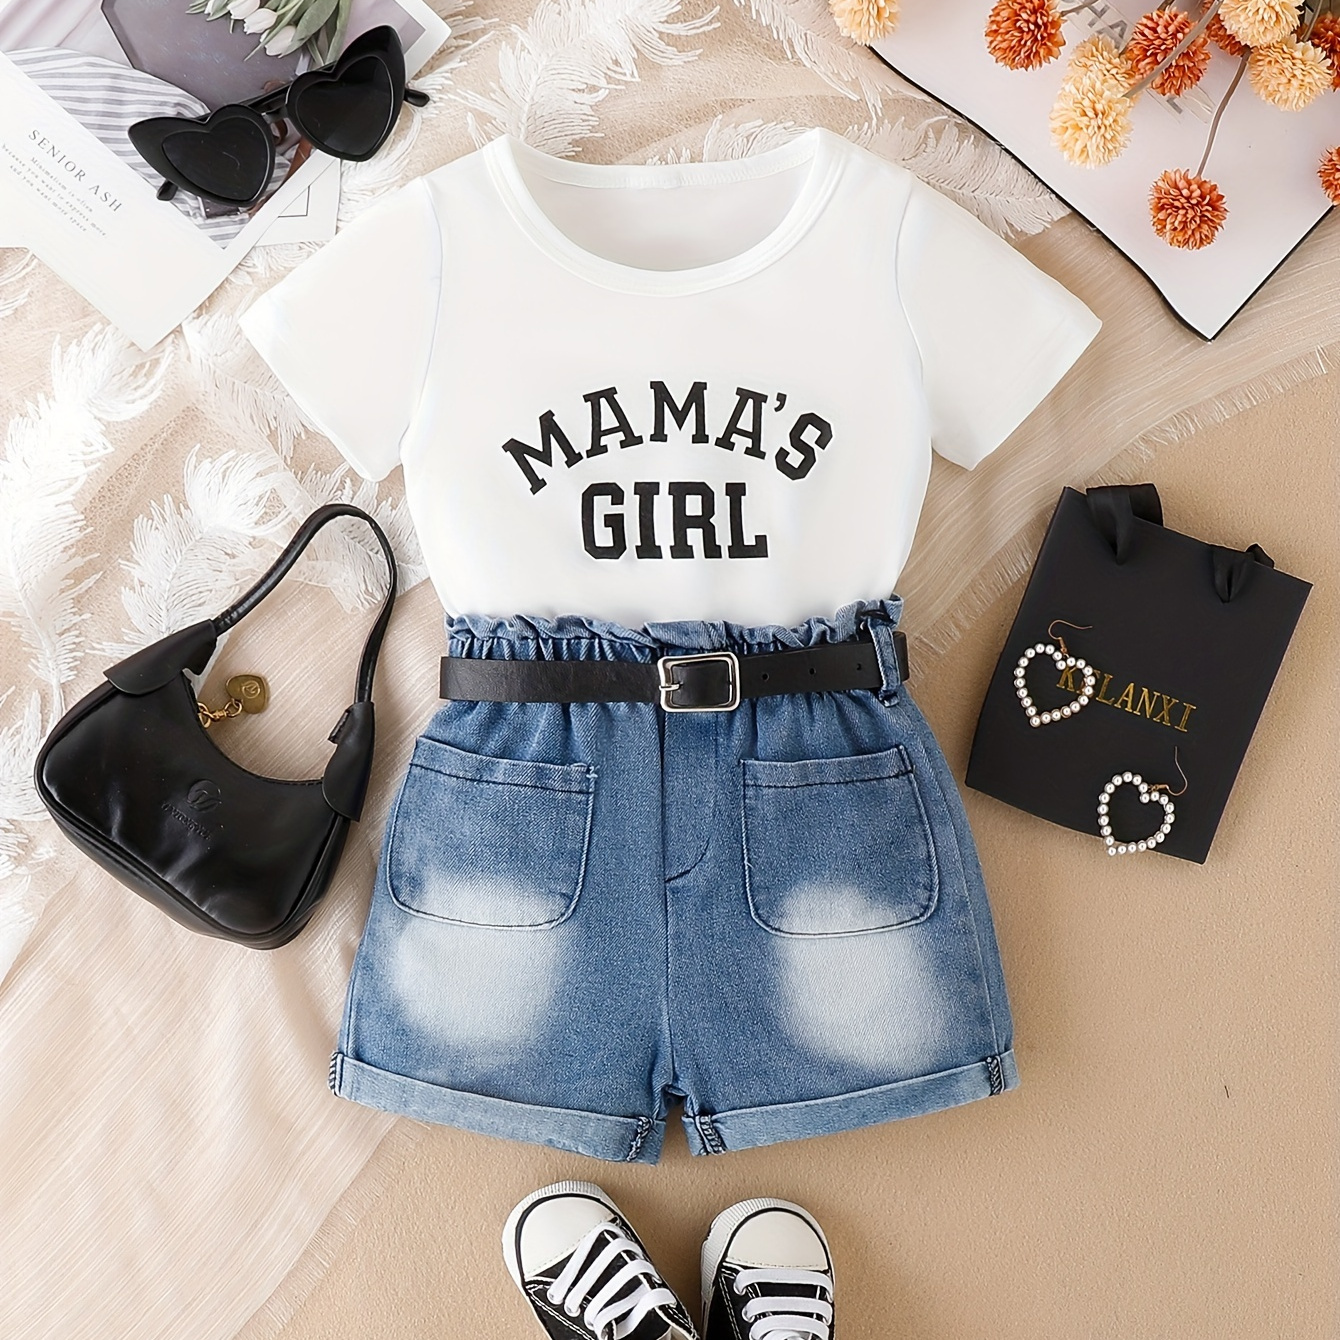 

Toddler Girl's 2-piece Outfit Set, "mama's Girl" Print Crew Neck Tee & Casual Elastic Waist Denim Shorts For Summer